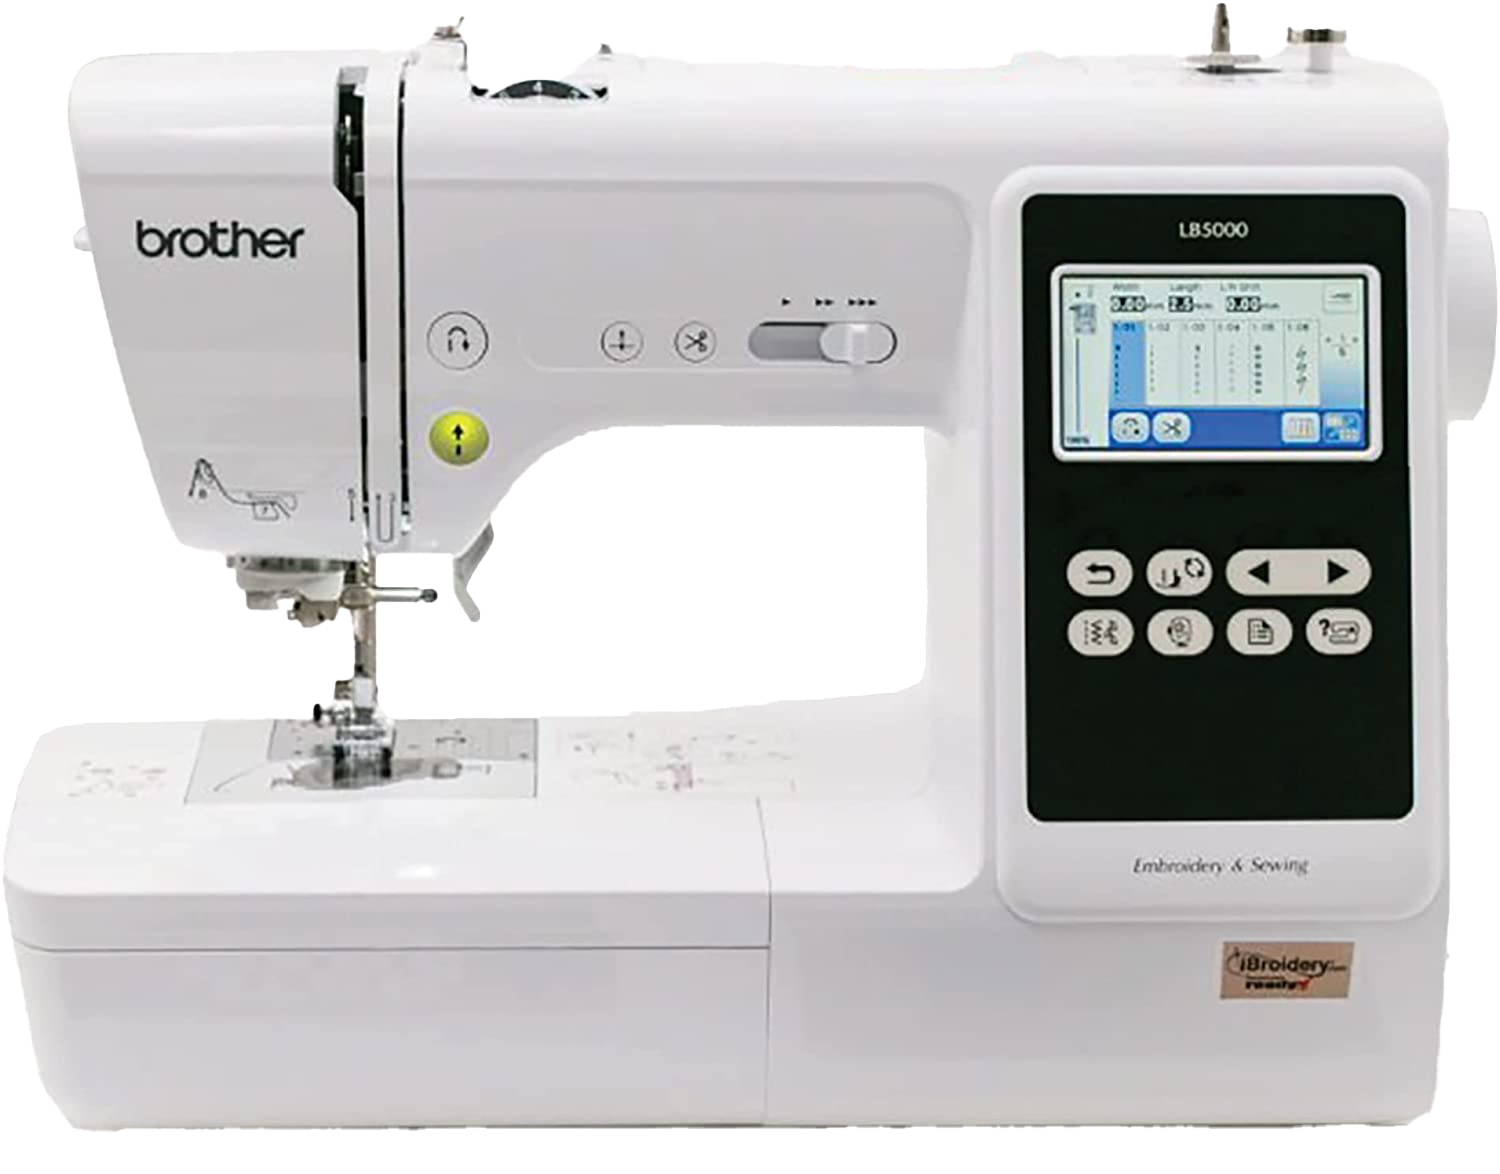 Refurbished Sewing and Embroidery Combo Machines